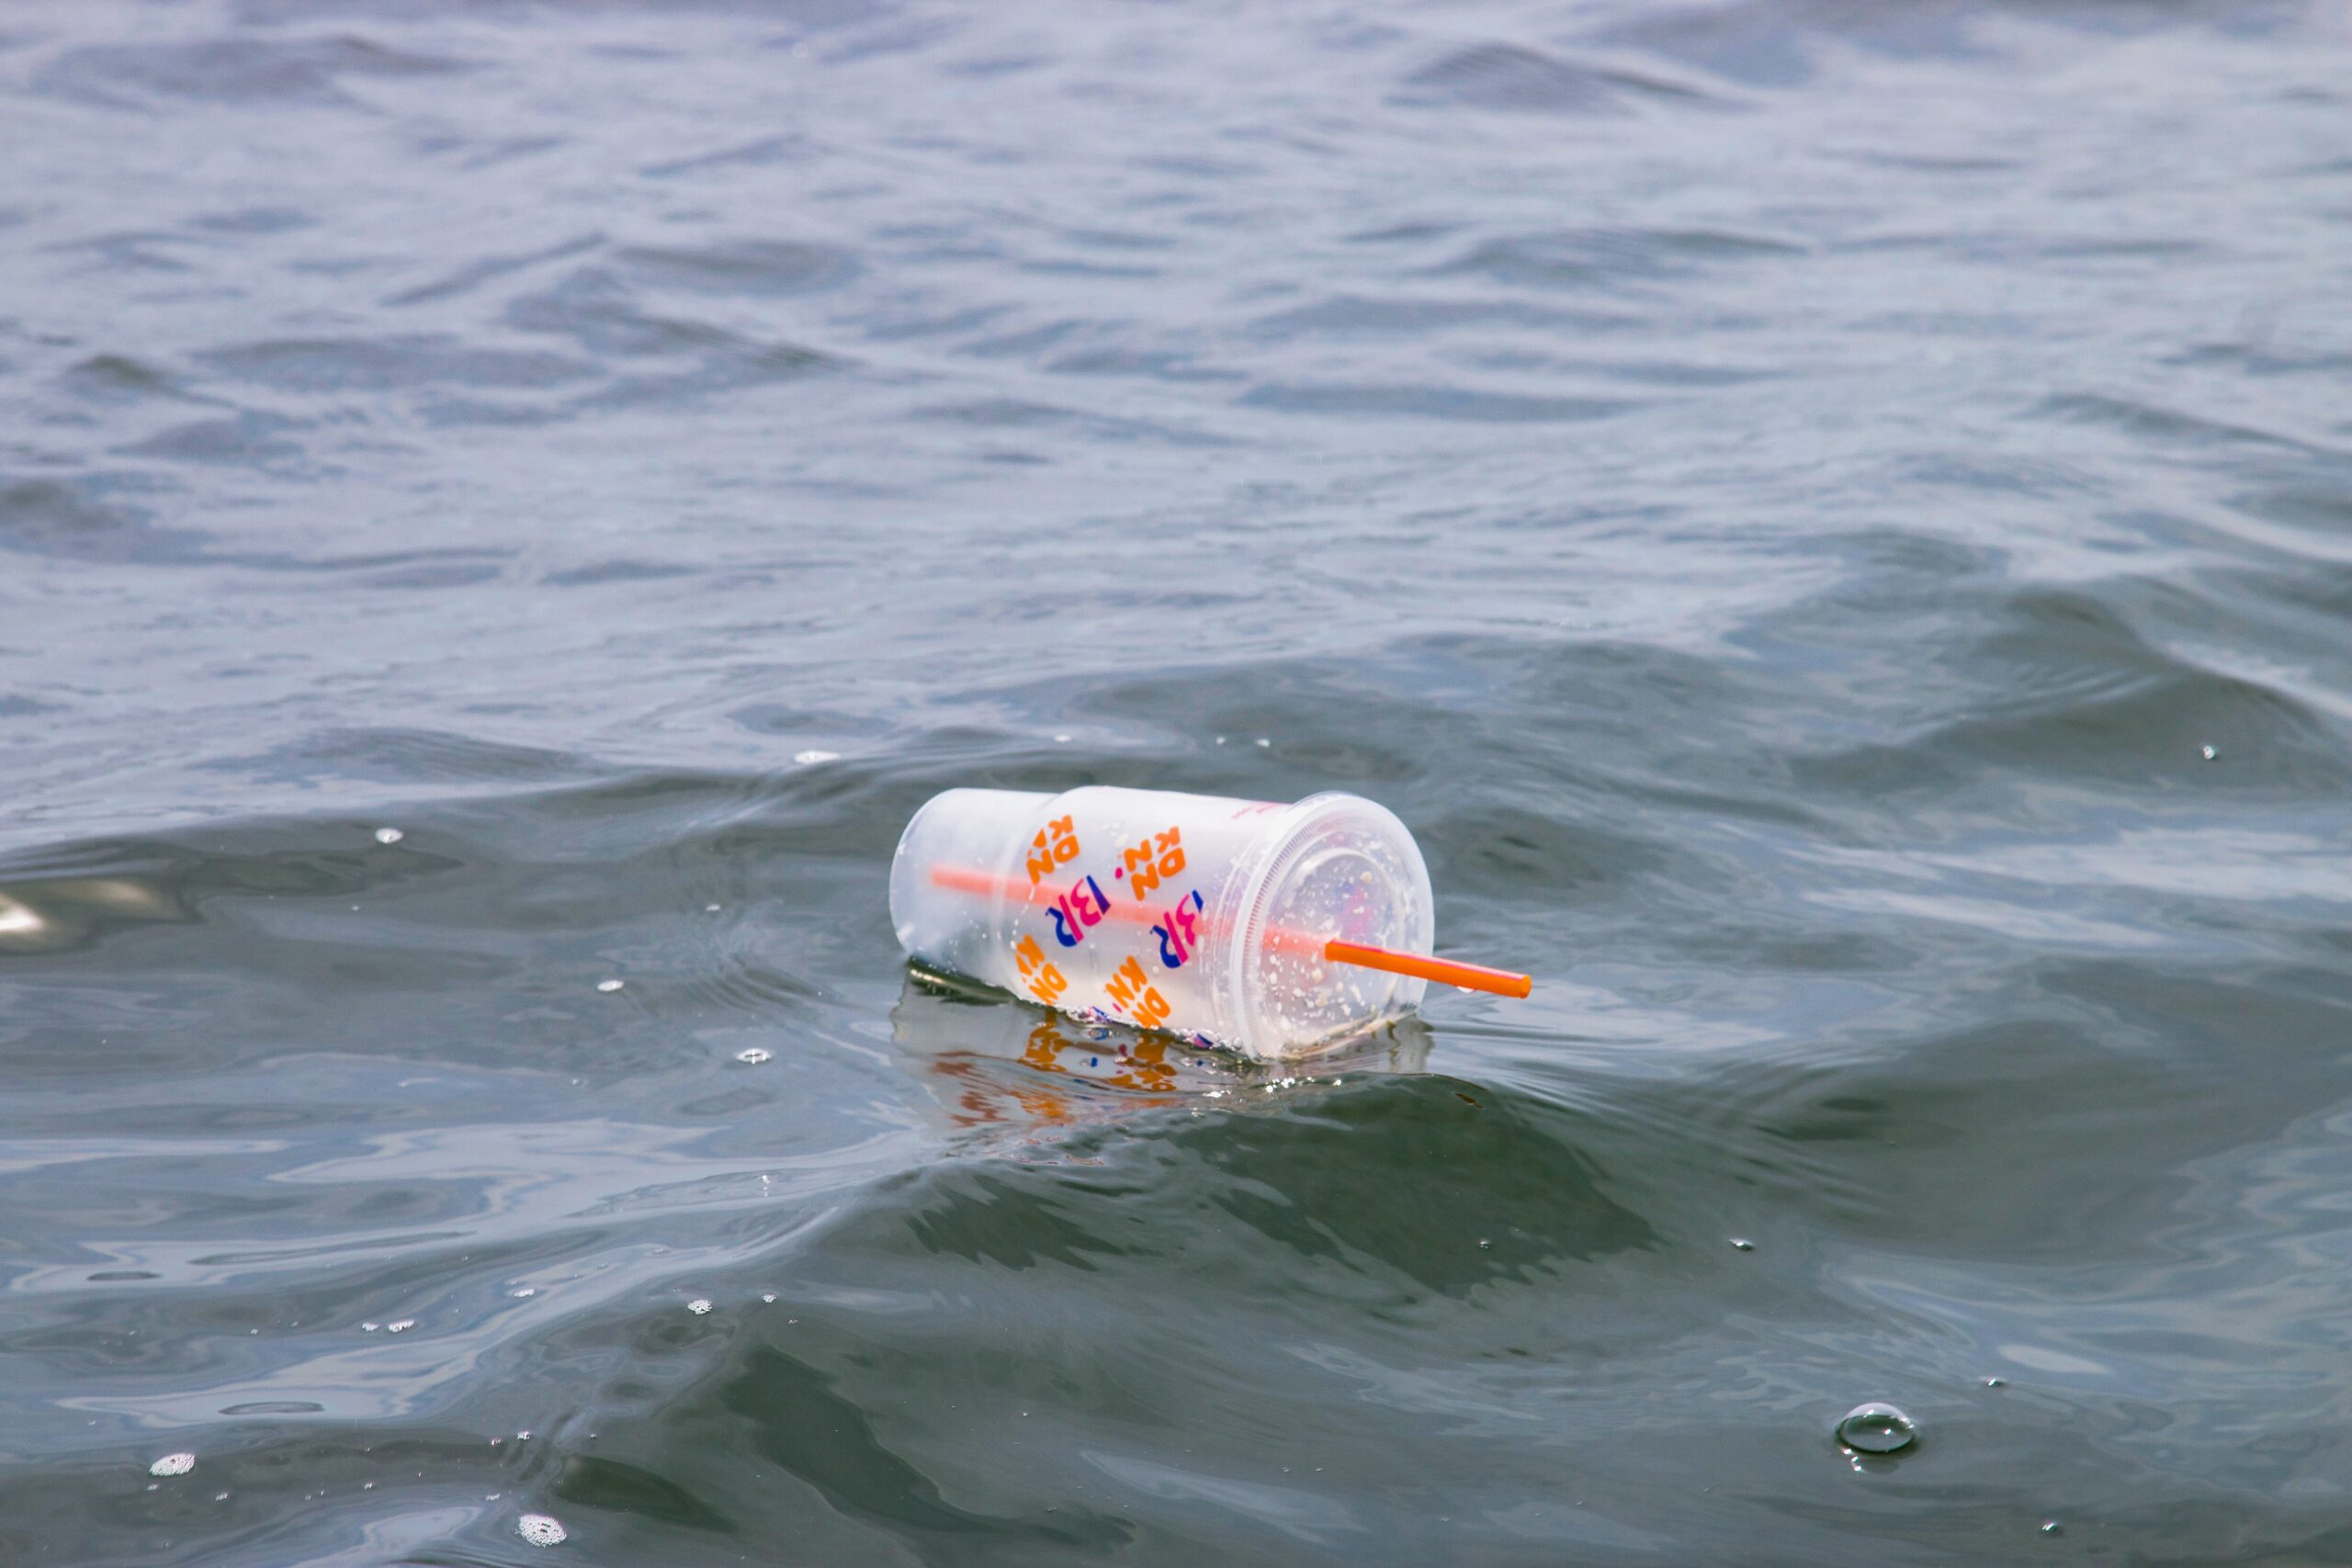 The last straw: Northwestern University students weigh in on consumer plastic pollution